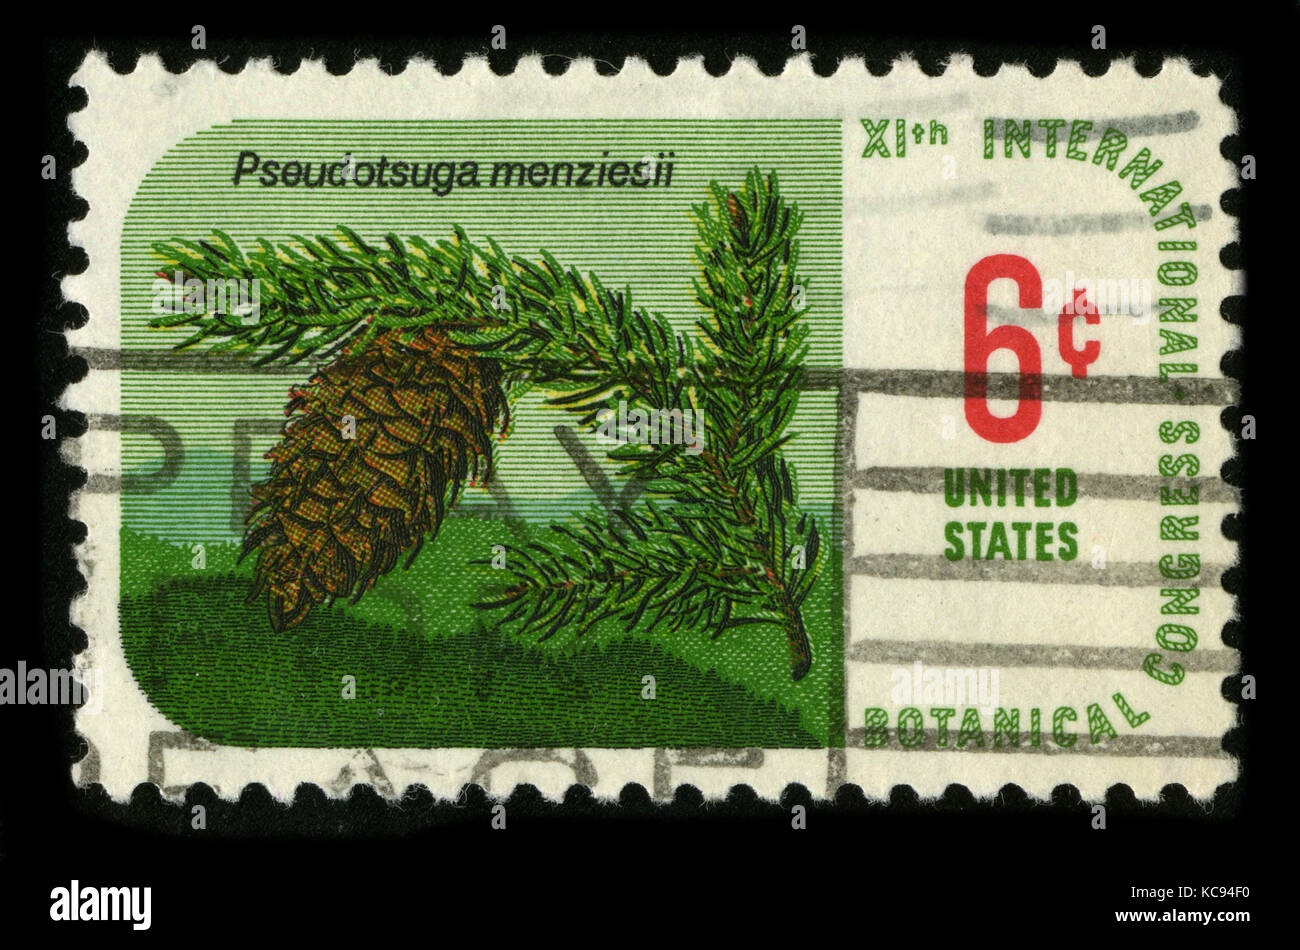 USA - CIRCA 1980: A stamp printed in USA shows image of the dedicated to the Botanical Congress International circa 1980. Stock Photo